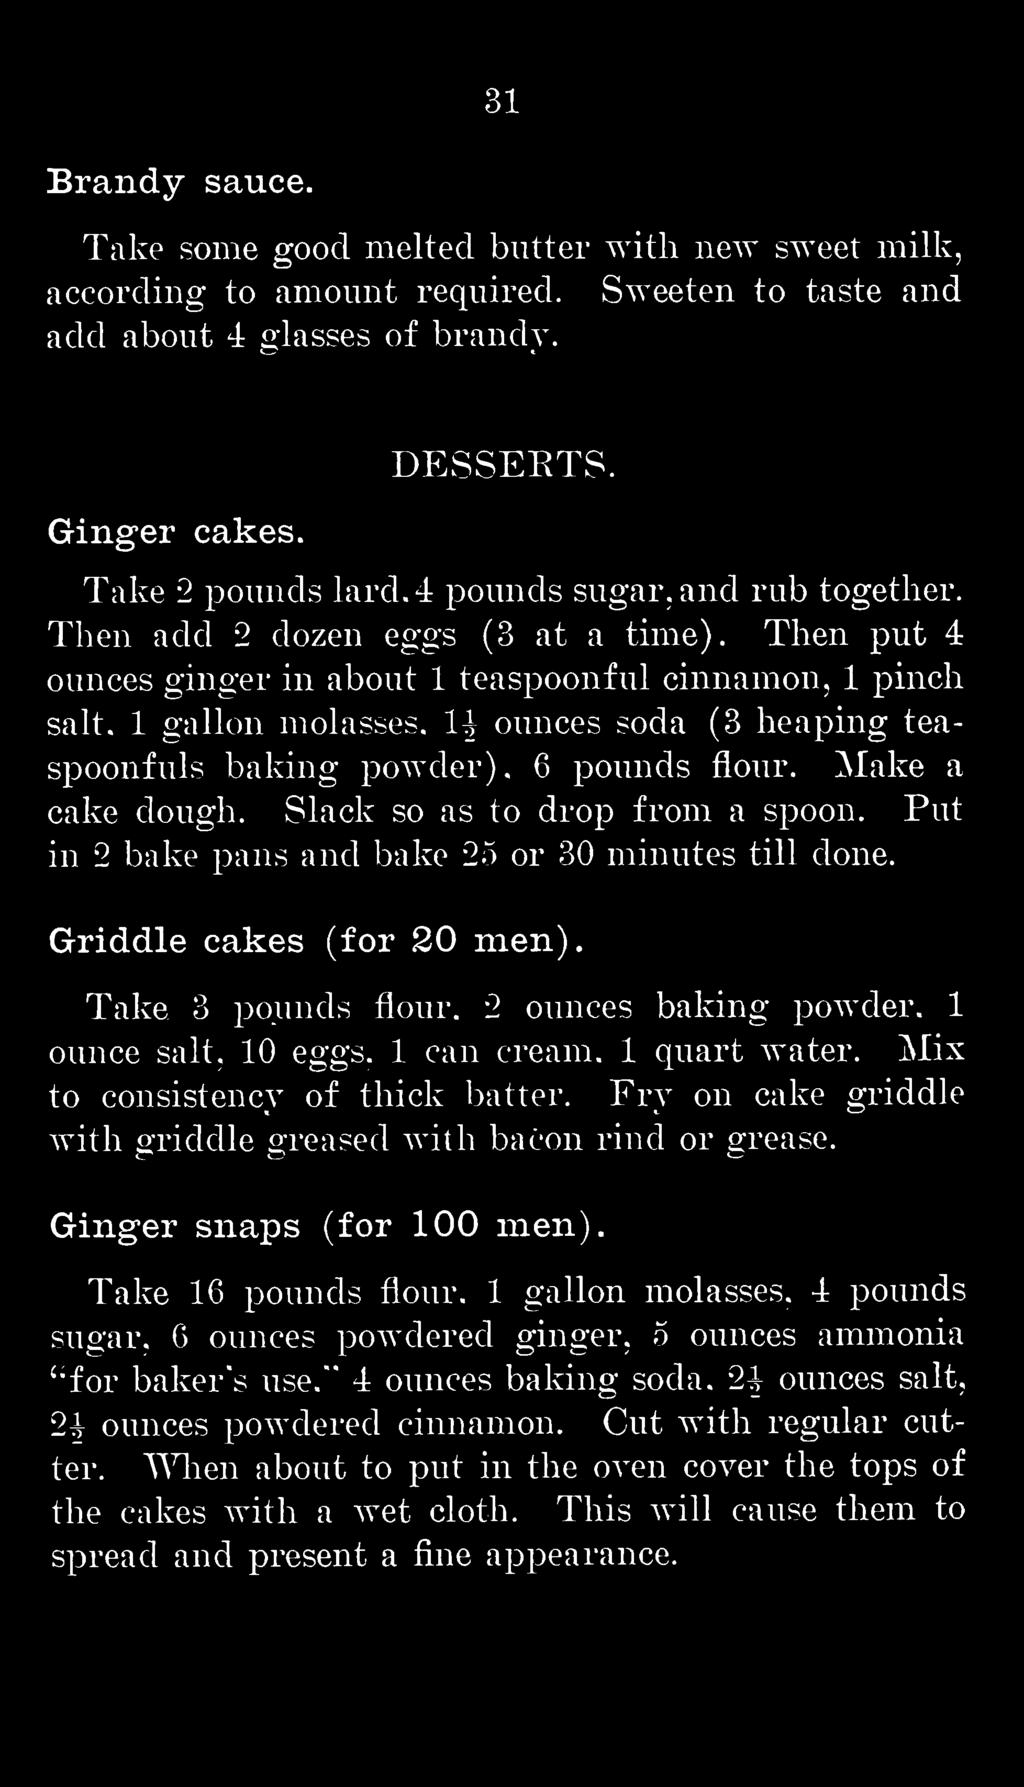 Mix to consistency of thick batter. Fry on cake griddle with griddle greased with bacon rind or grease. Ginger snaps (for 100 men).